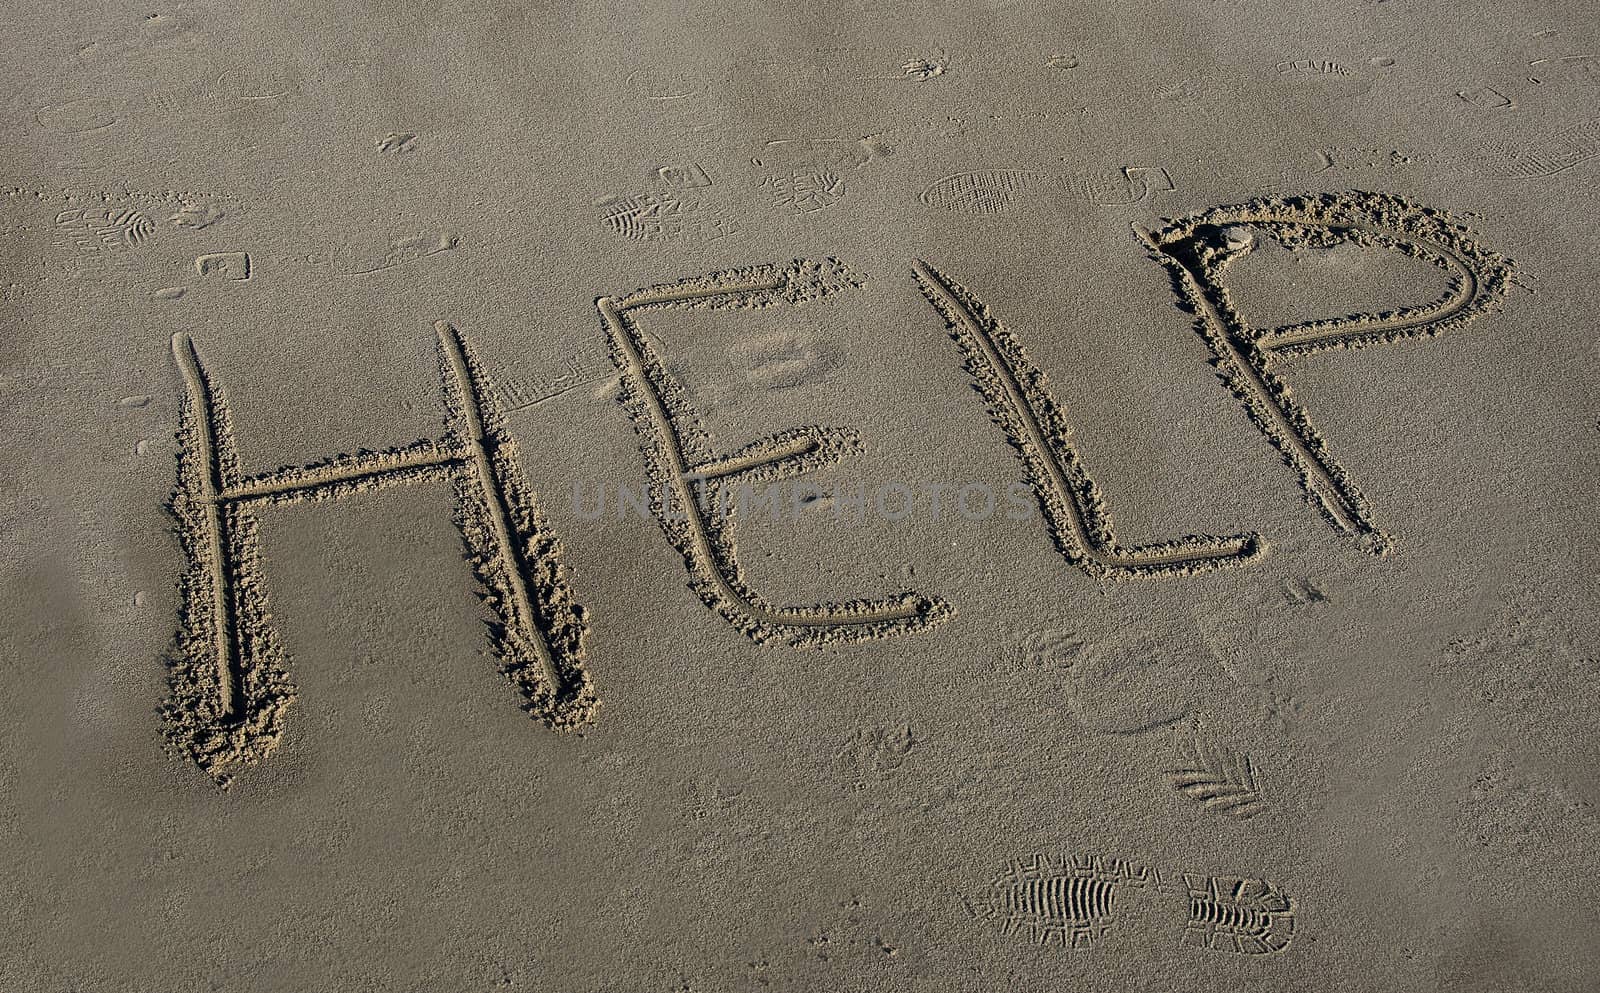 help writing in the sand